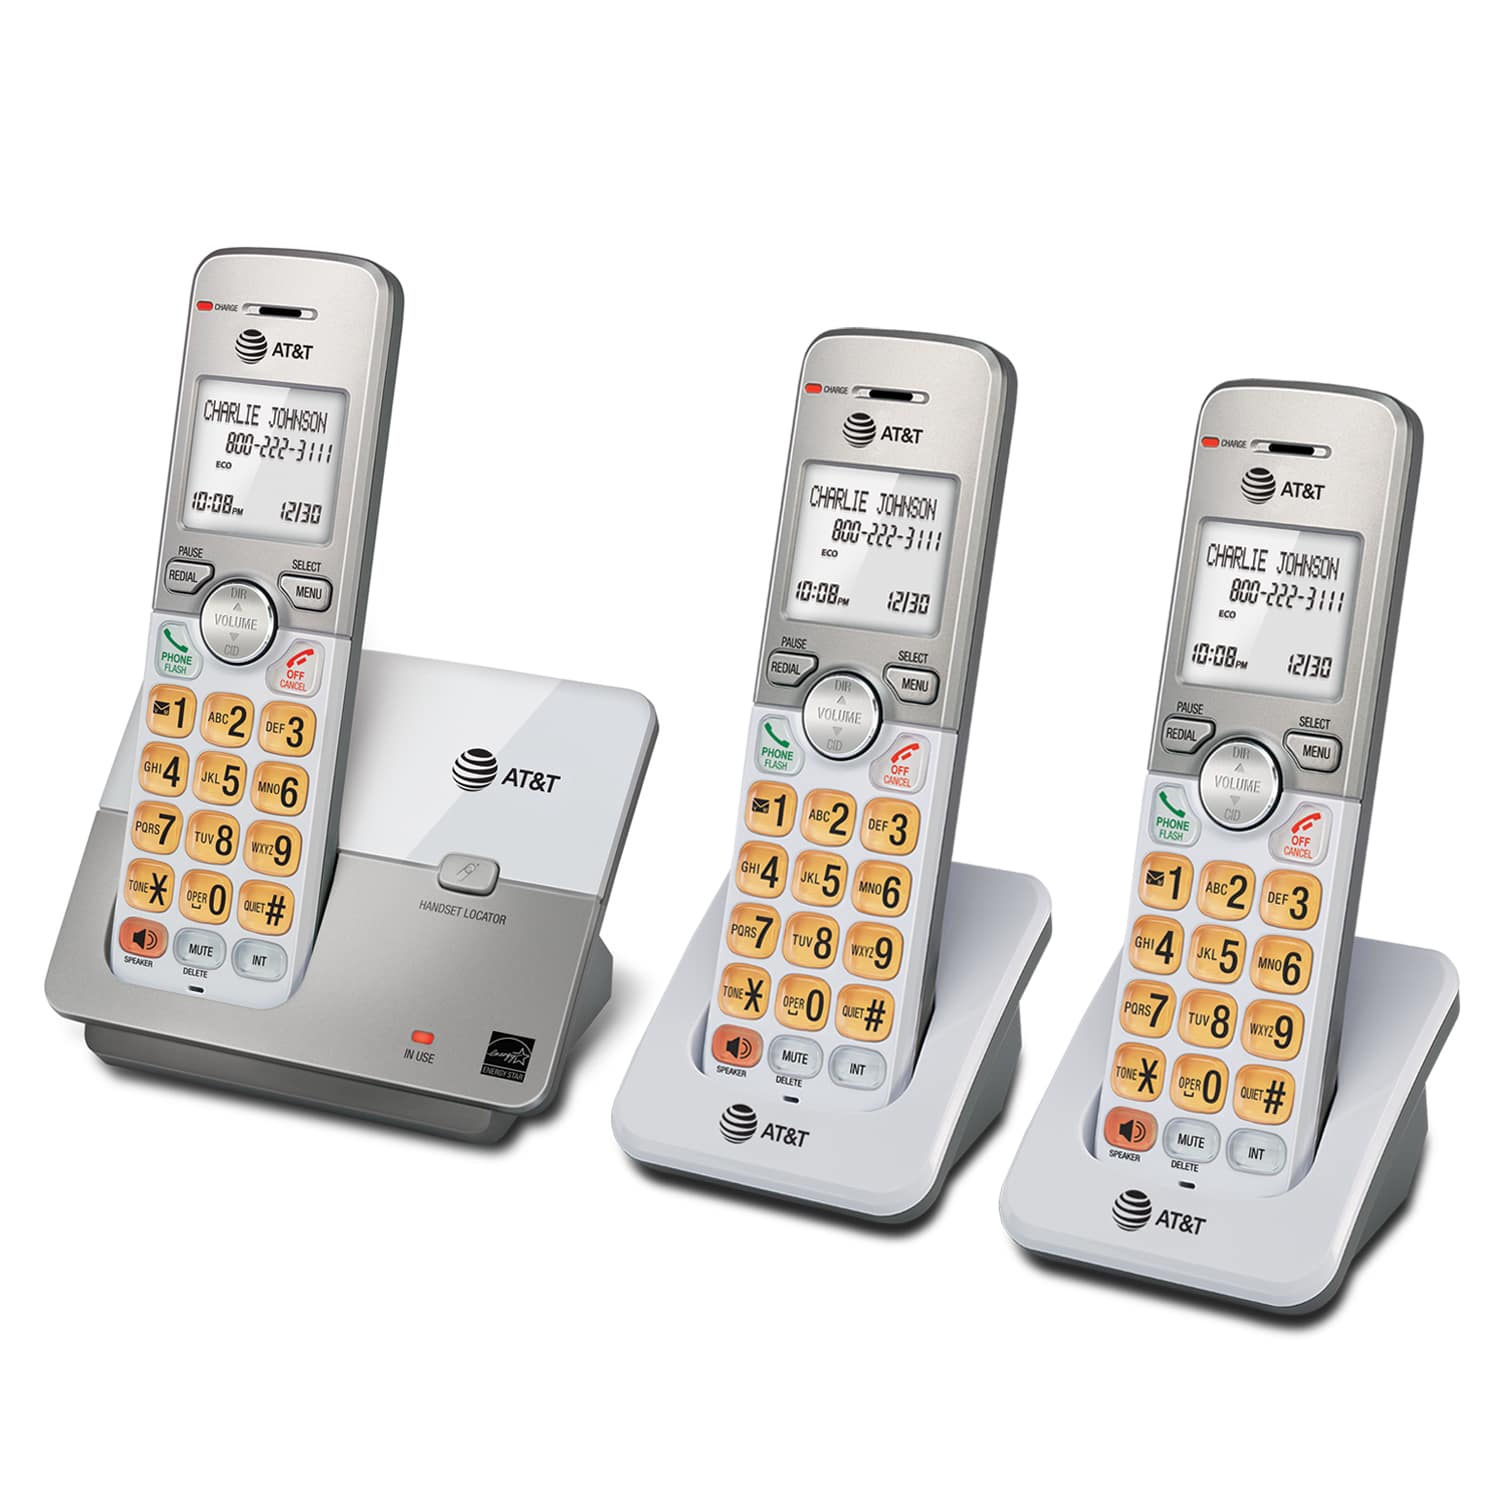 3 handset cordless phone system with caller ID/call waiting - view 2